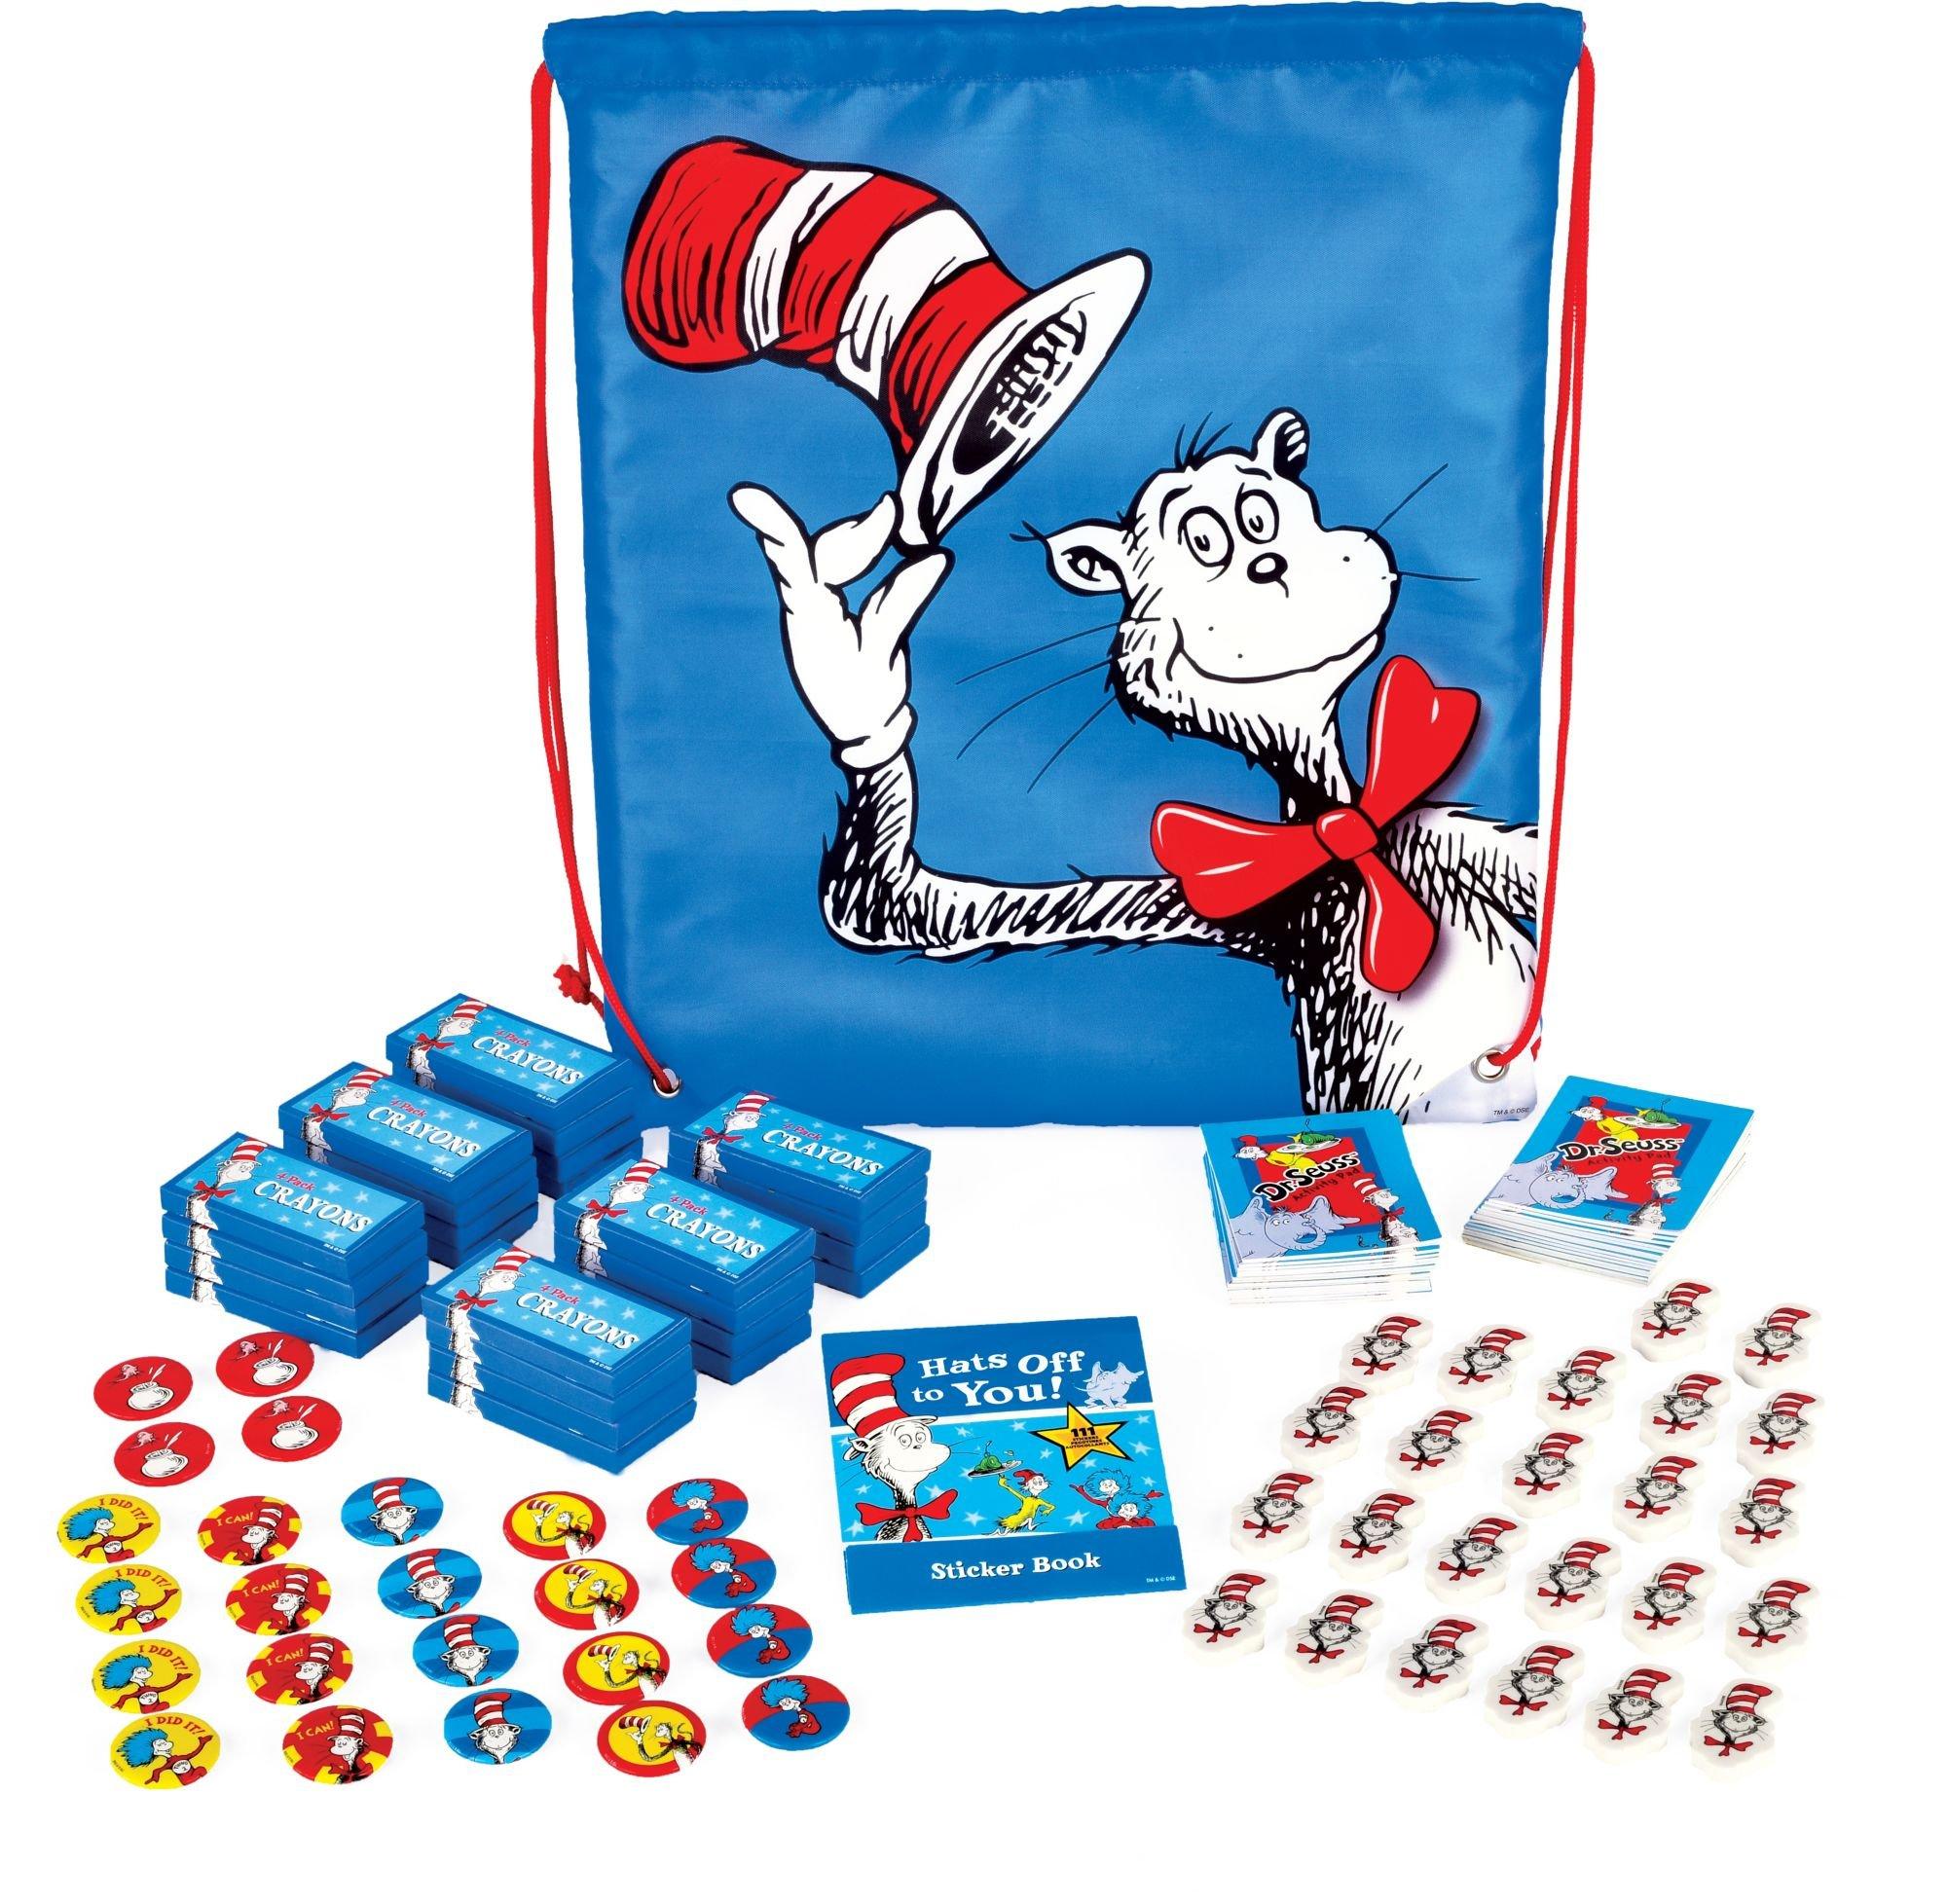 Exclusive Dr. Seuss Drawstring Backpack with Favors for 24